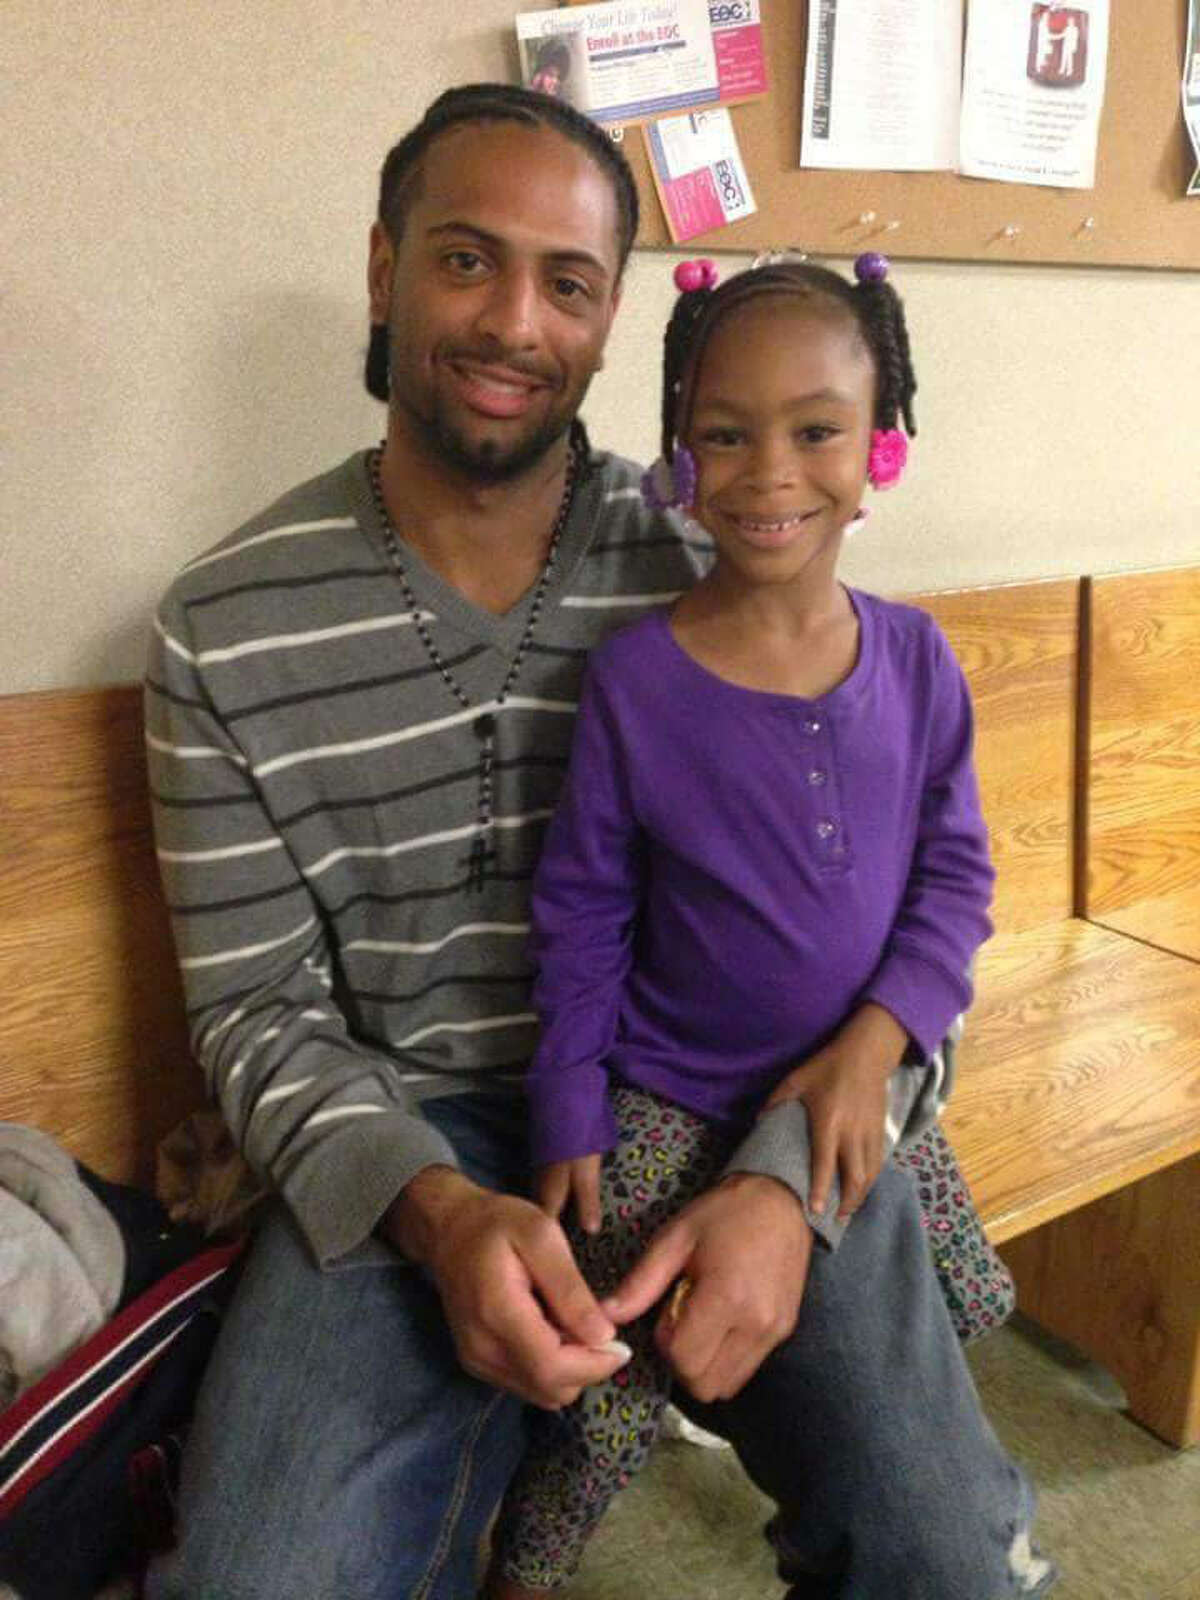 Mark Cannon with his daughter. (Provided)